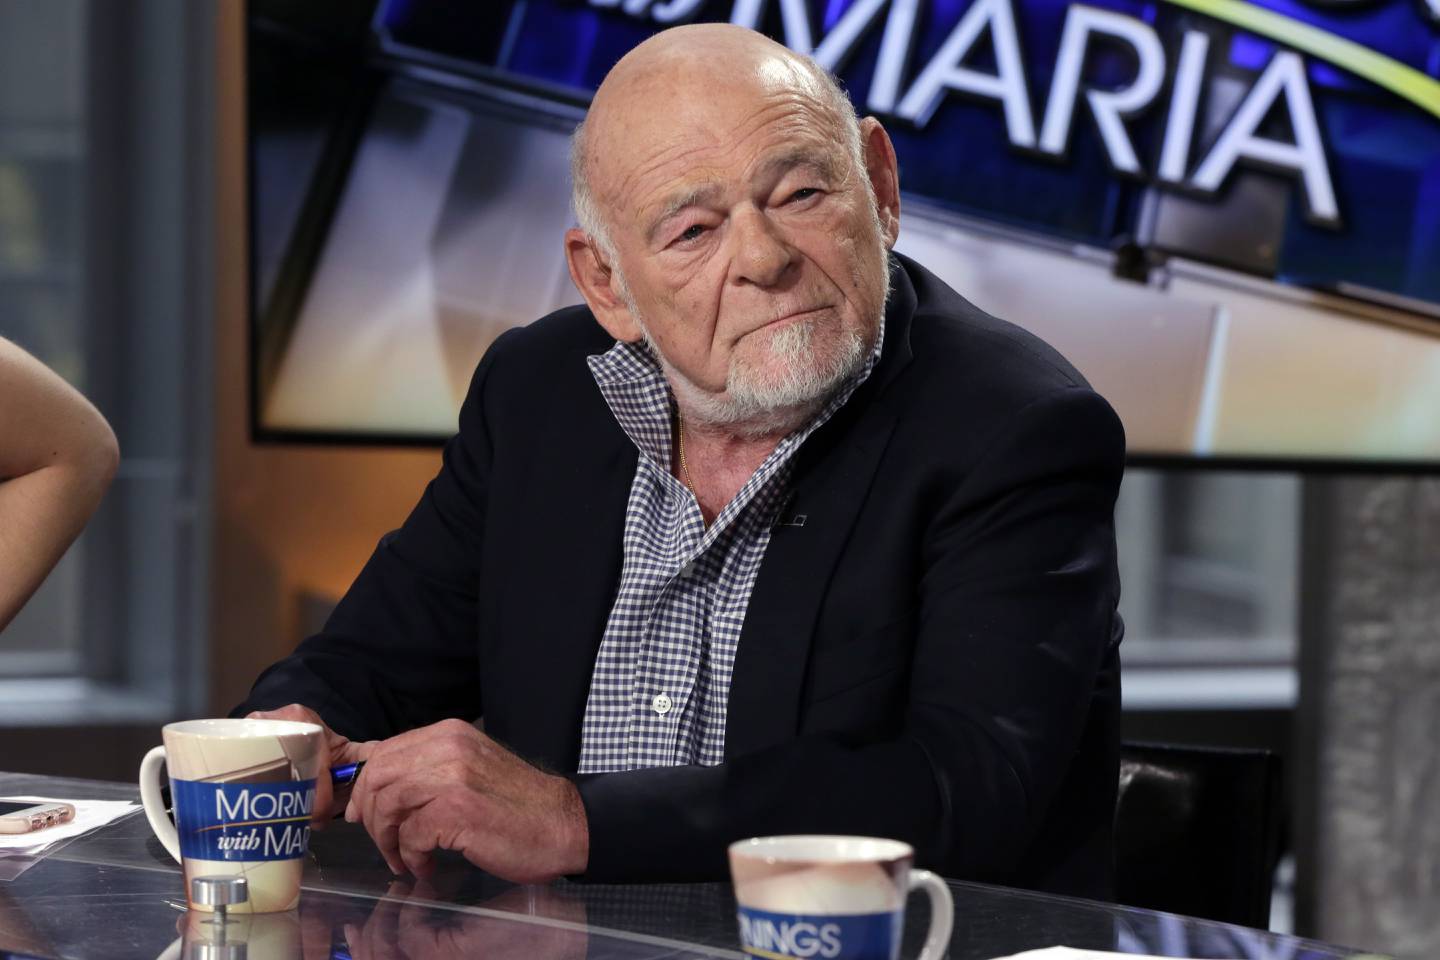 FILE - Sam Zell listens during an interview by Maria Bartiromo, during her "Mornings with Maria Bartiromo" program on the Fox Business Network, in New York, on Aug. 15, 2017. Zell, a Chicago real estate magnate who earned a multibillion-dollar fortune and a reputation as "the grave dancer" for his ability to revive moribund properties, died on Thursday, May 18, 2023. He was 81.